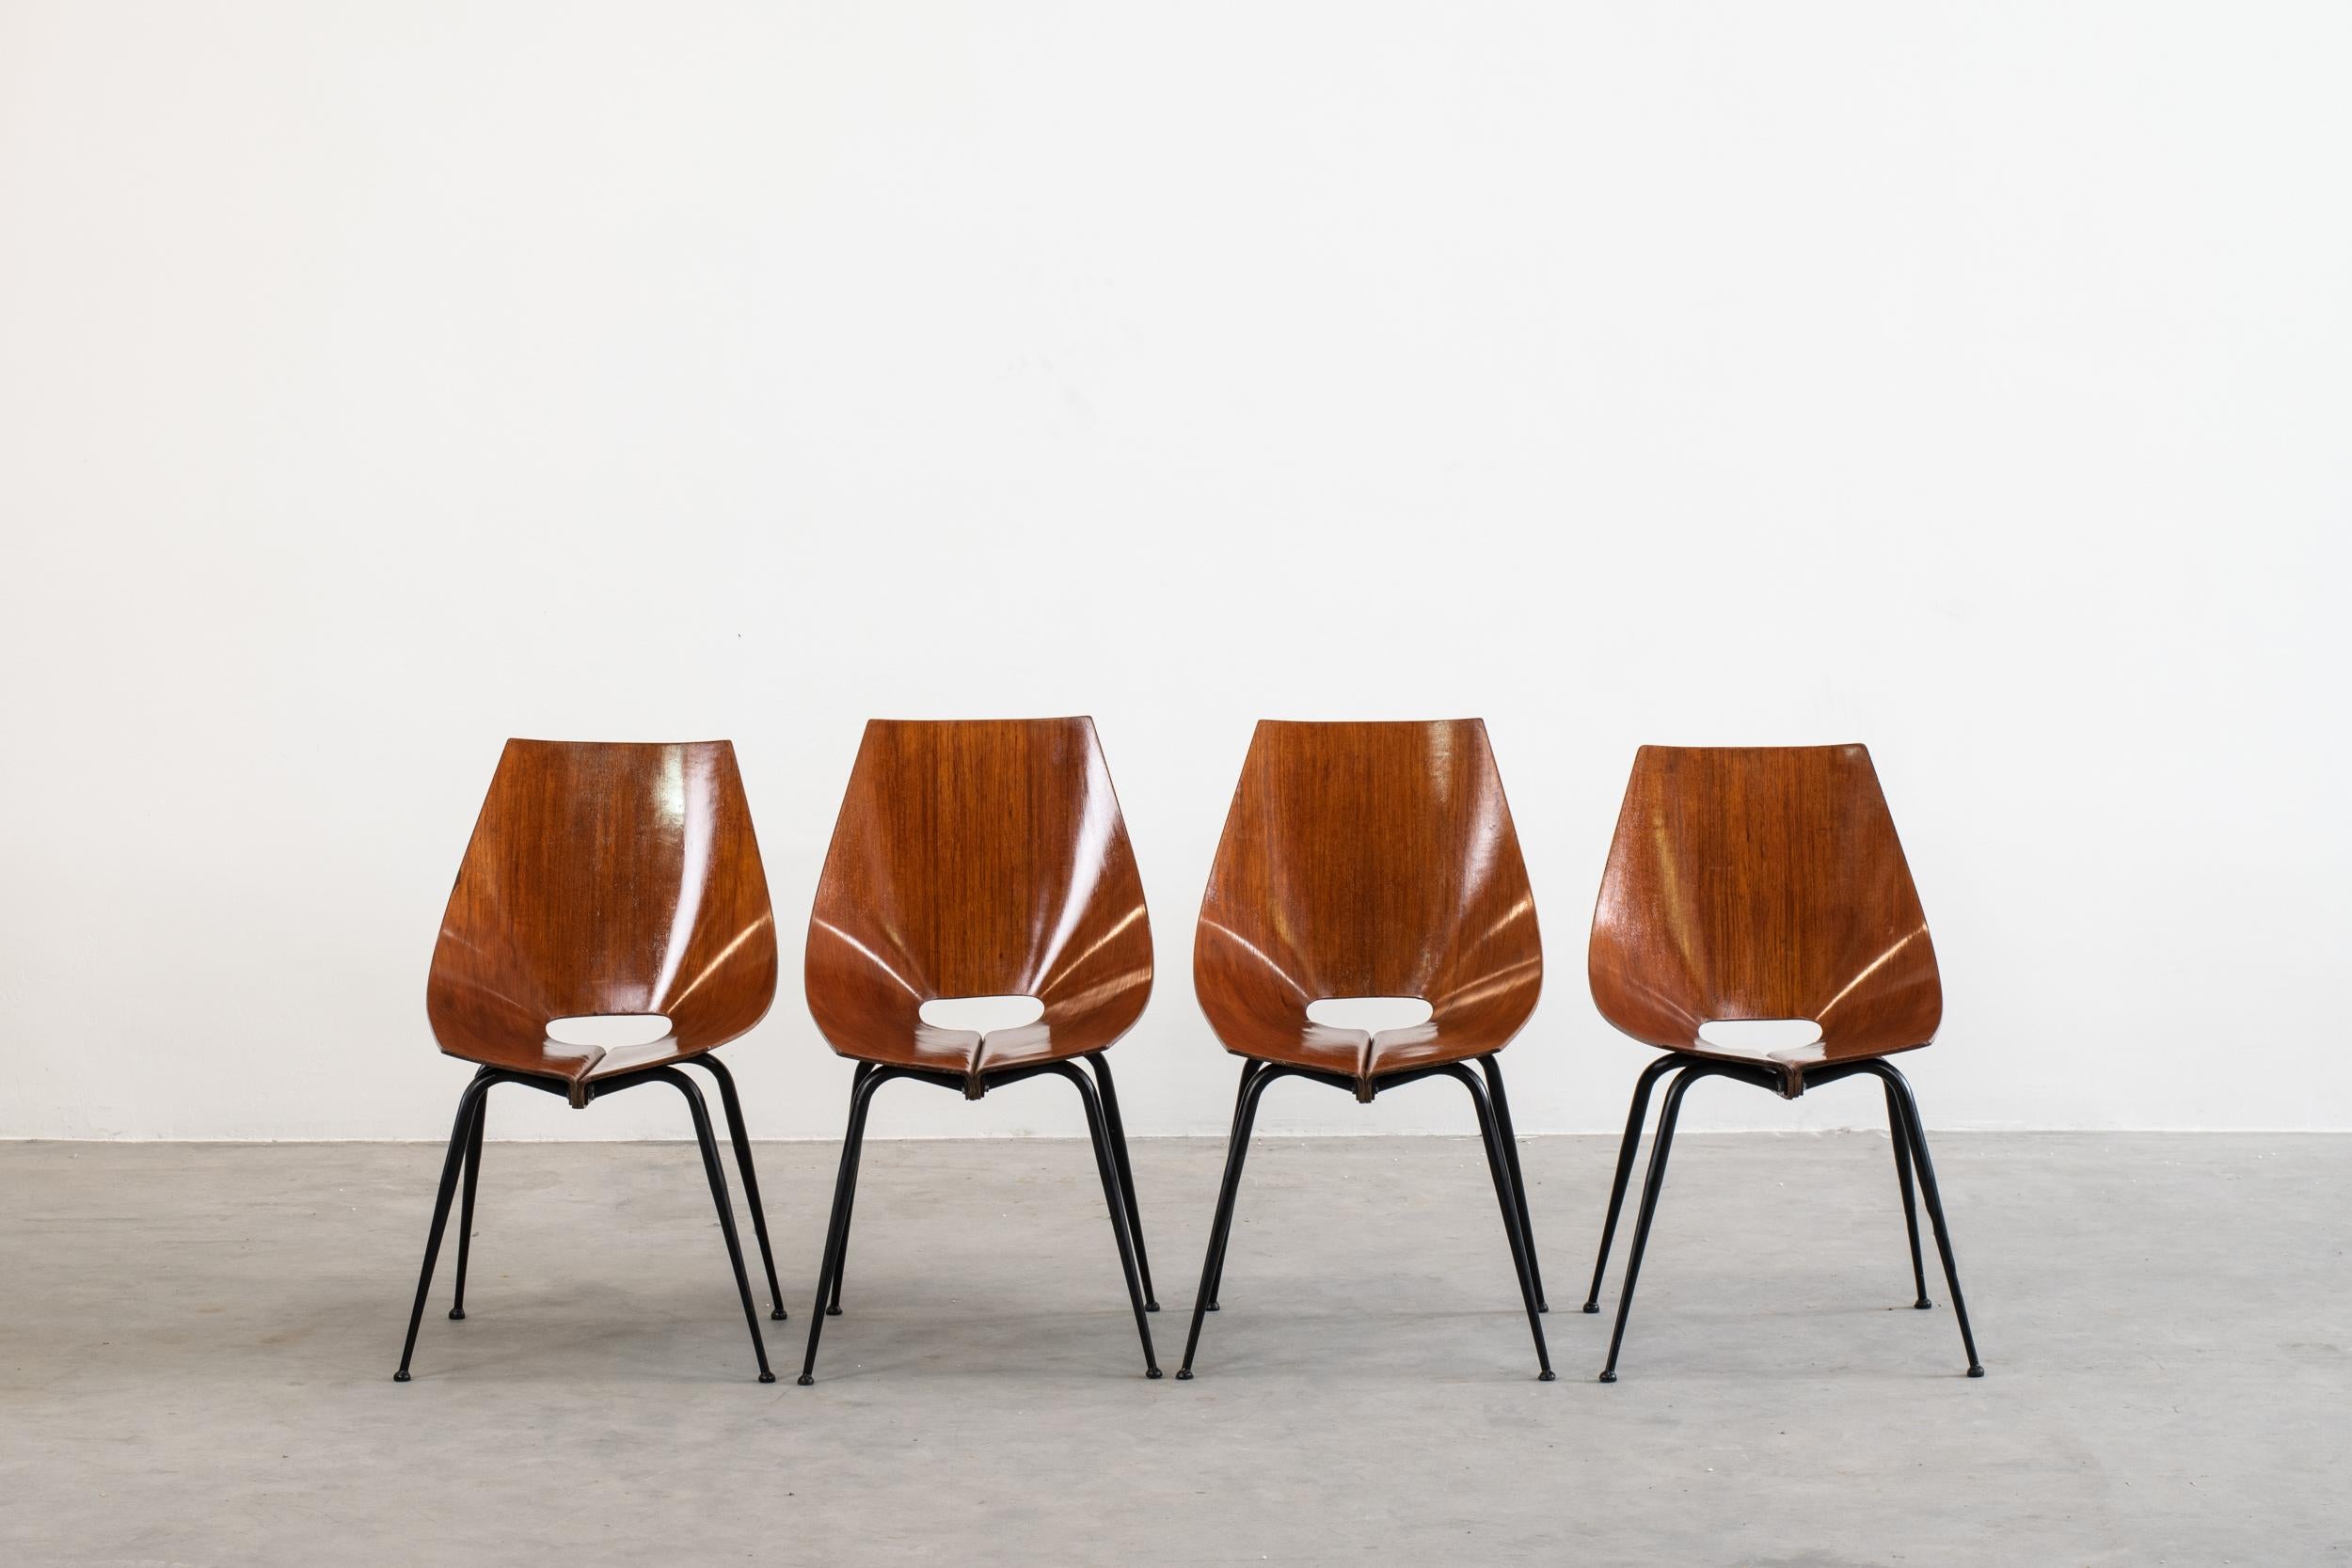 Set of four dining chairs with a frame in black lacquered metal and seat in curved plywood, attributed to Carlo Ratti and produced by Società Compensati Curvati in the 1950s.

In Italy, at the beginning of the XX century, industries of curved solid